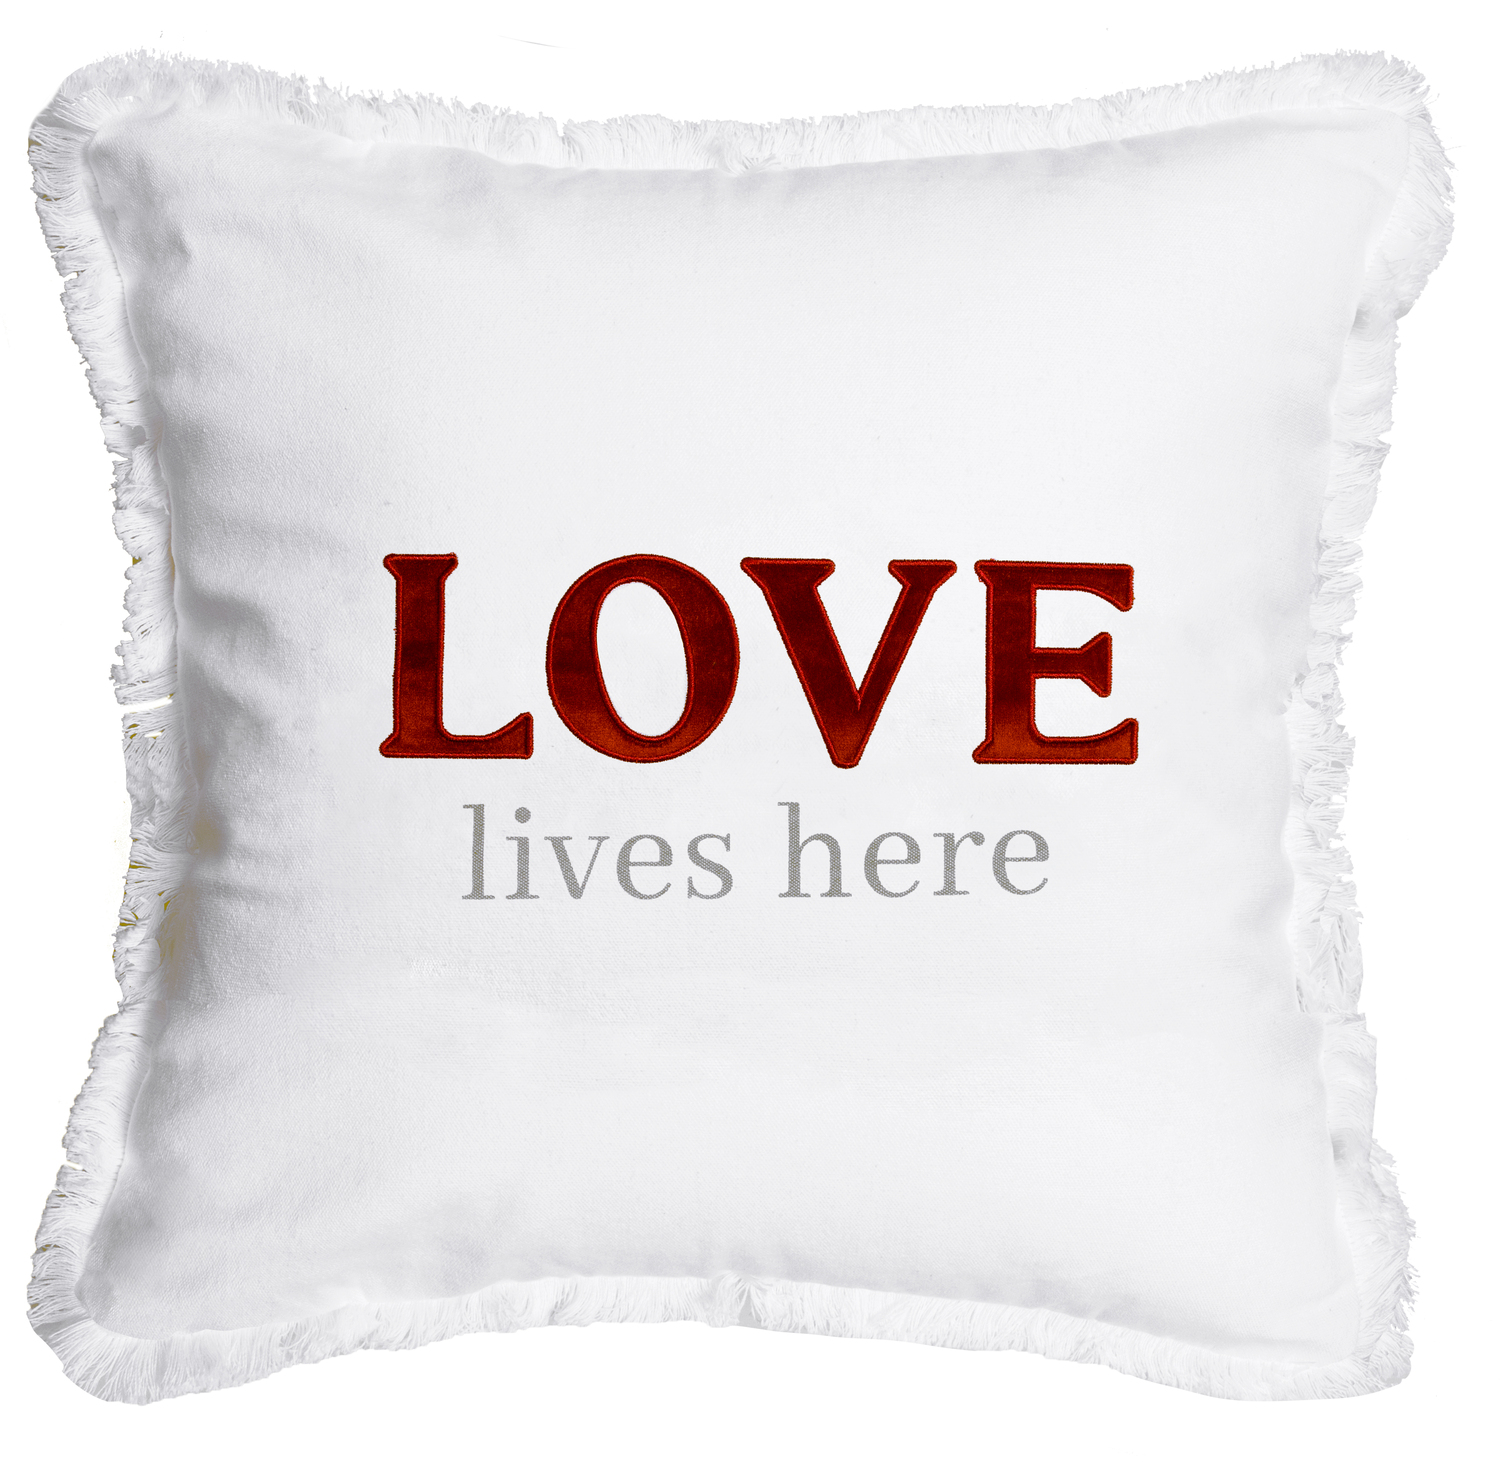 Love Lives Here by Tossing Words Around - Love Lives Here - 18" Throw Pillow Cover